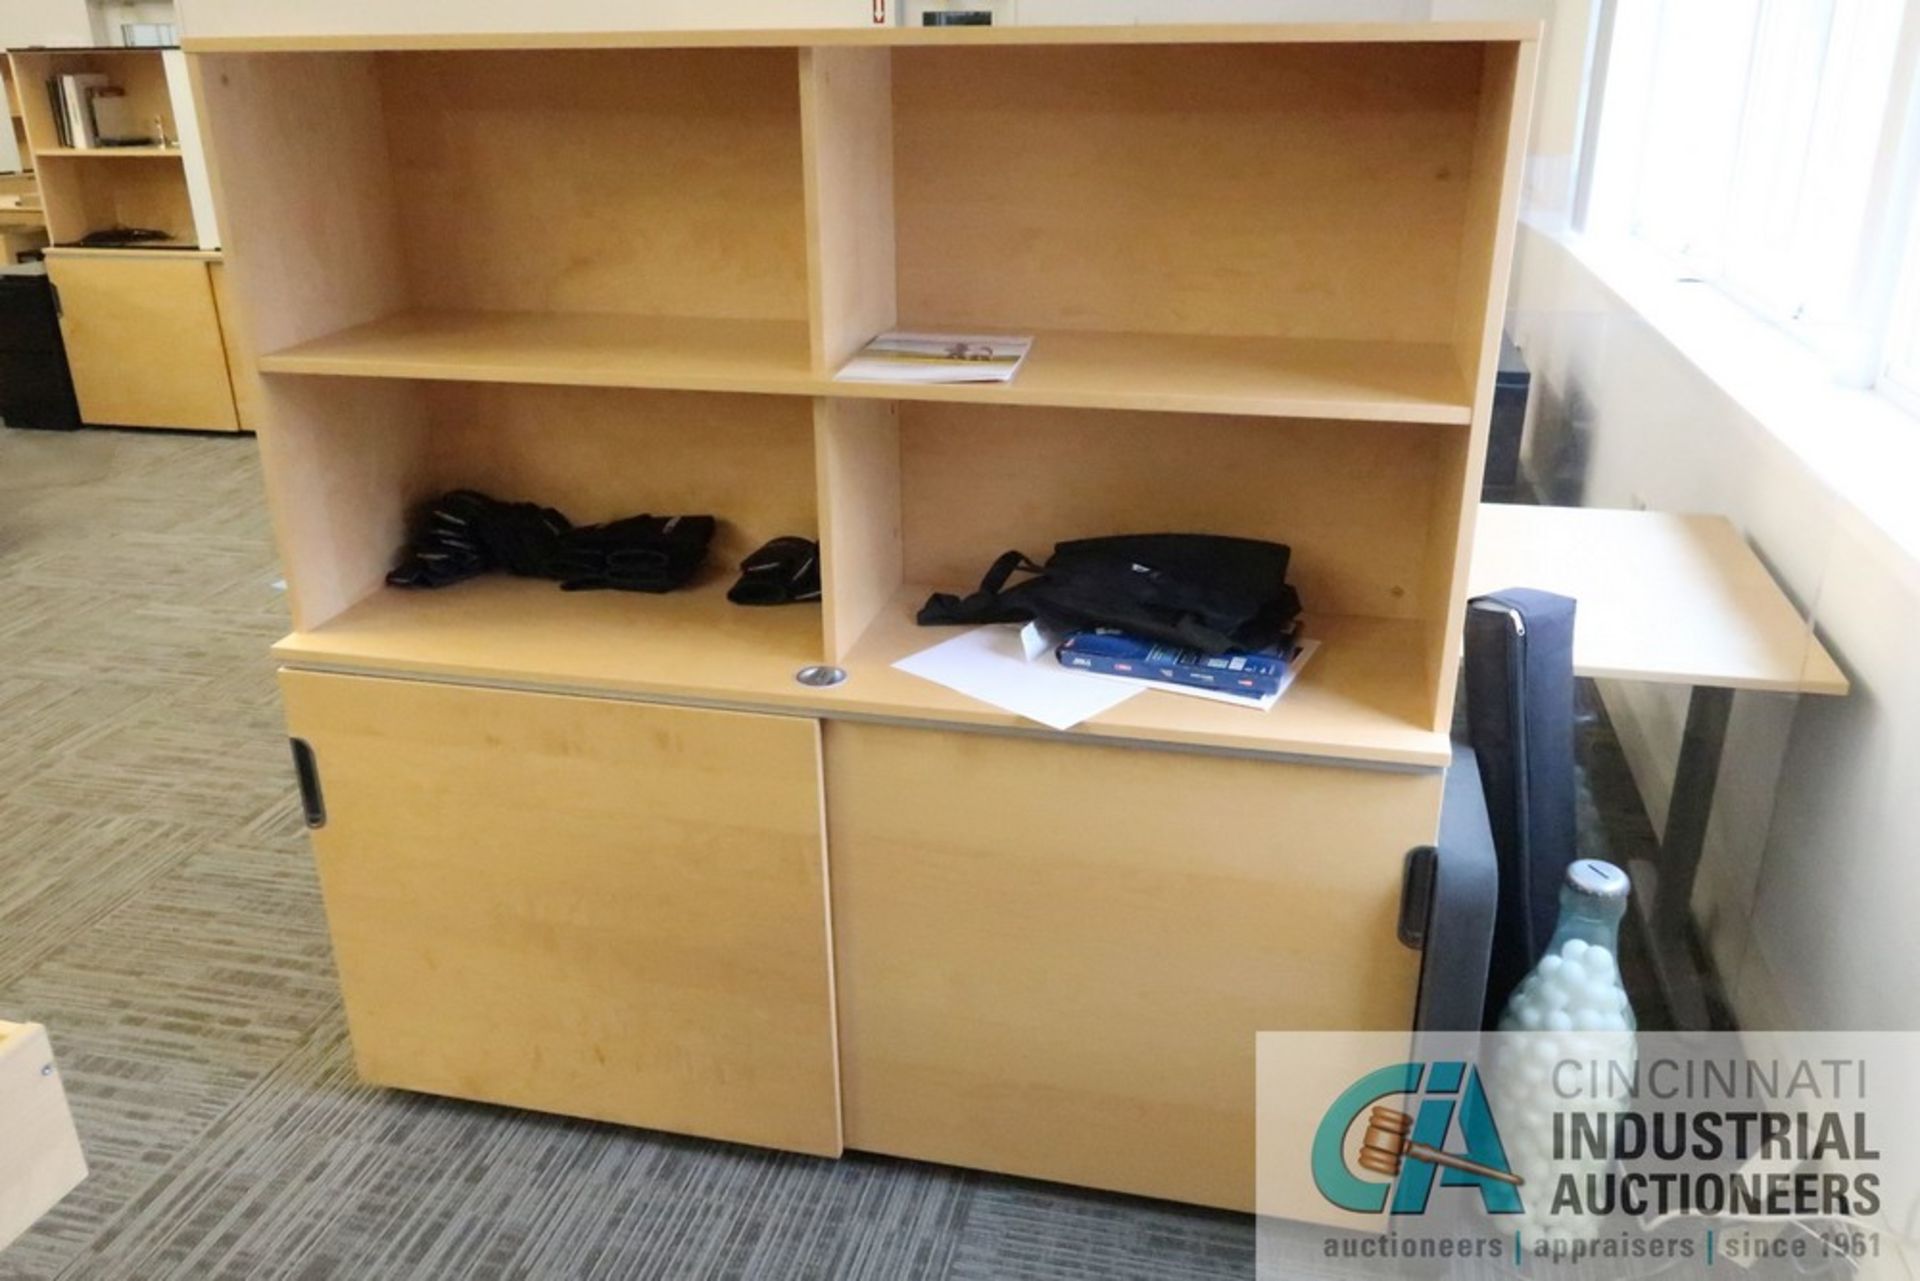 79" X 86" X 24" GALANT L-SHAPED DESKT, (1) 3-DRAWER CABINET, (1) BOOKCASE WITH LOWER STORAGE, (1) - Image 5 of 5